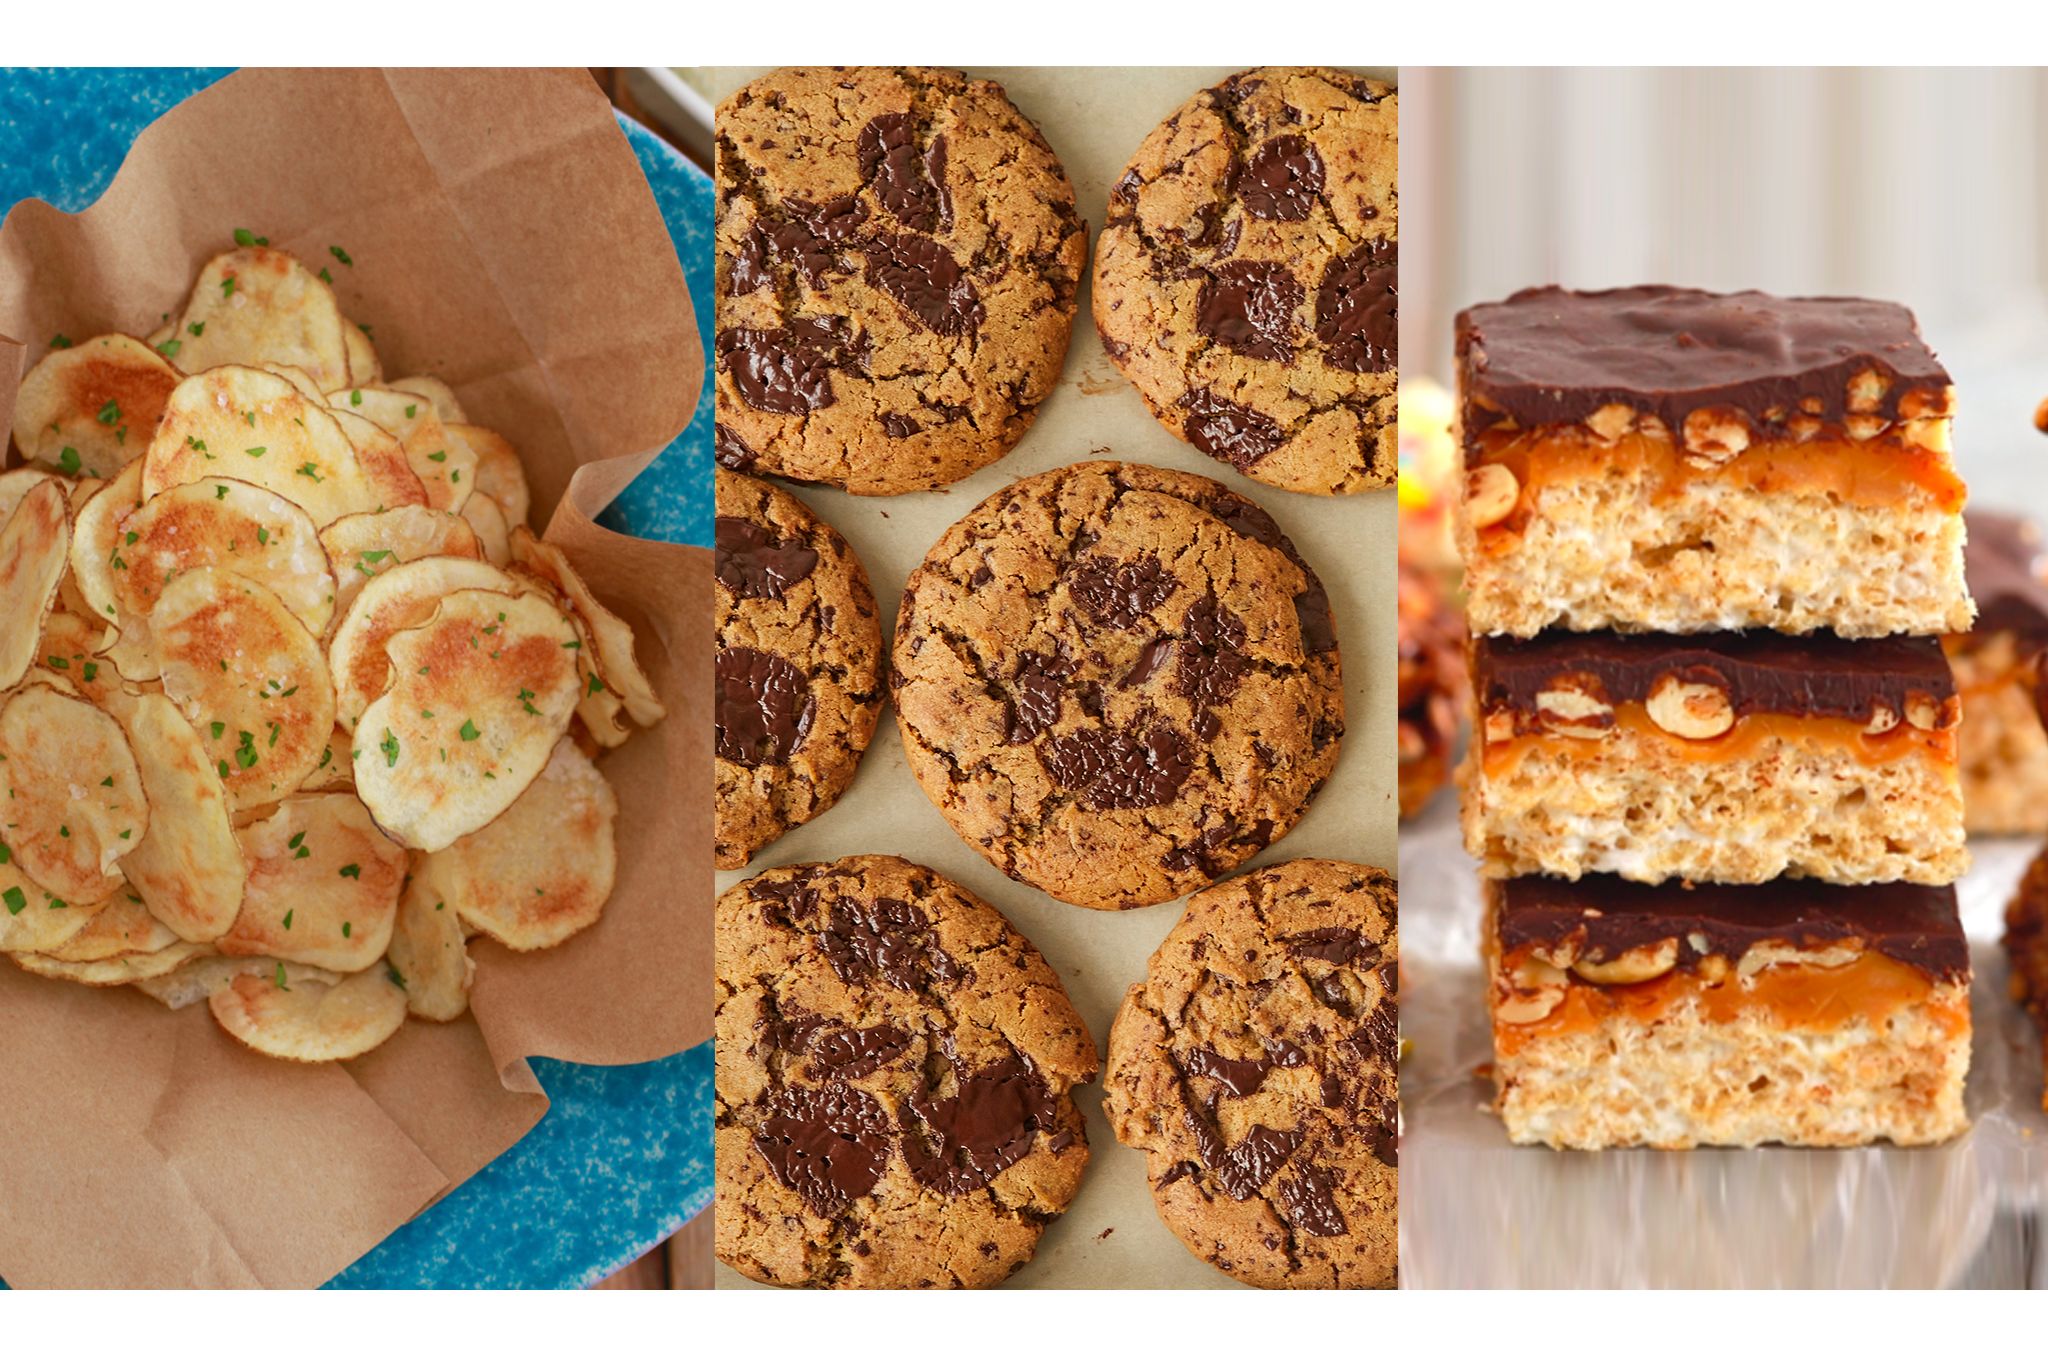 Three images are situated side by side. On the left are homemade microwavable potato chip. In the middle are chocolate and peanut butter cookies. On the right are homemade Rice Krispies bars.